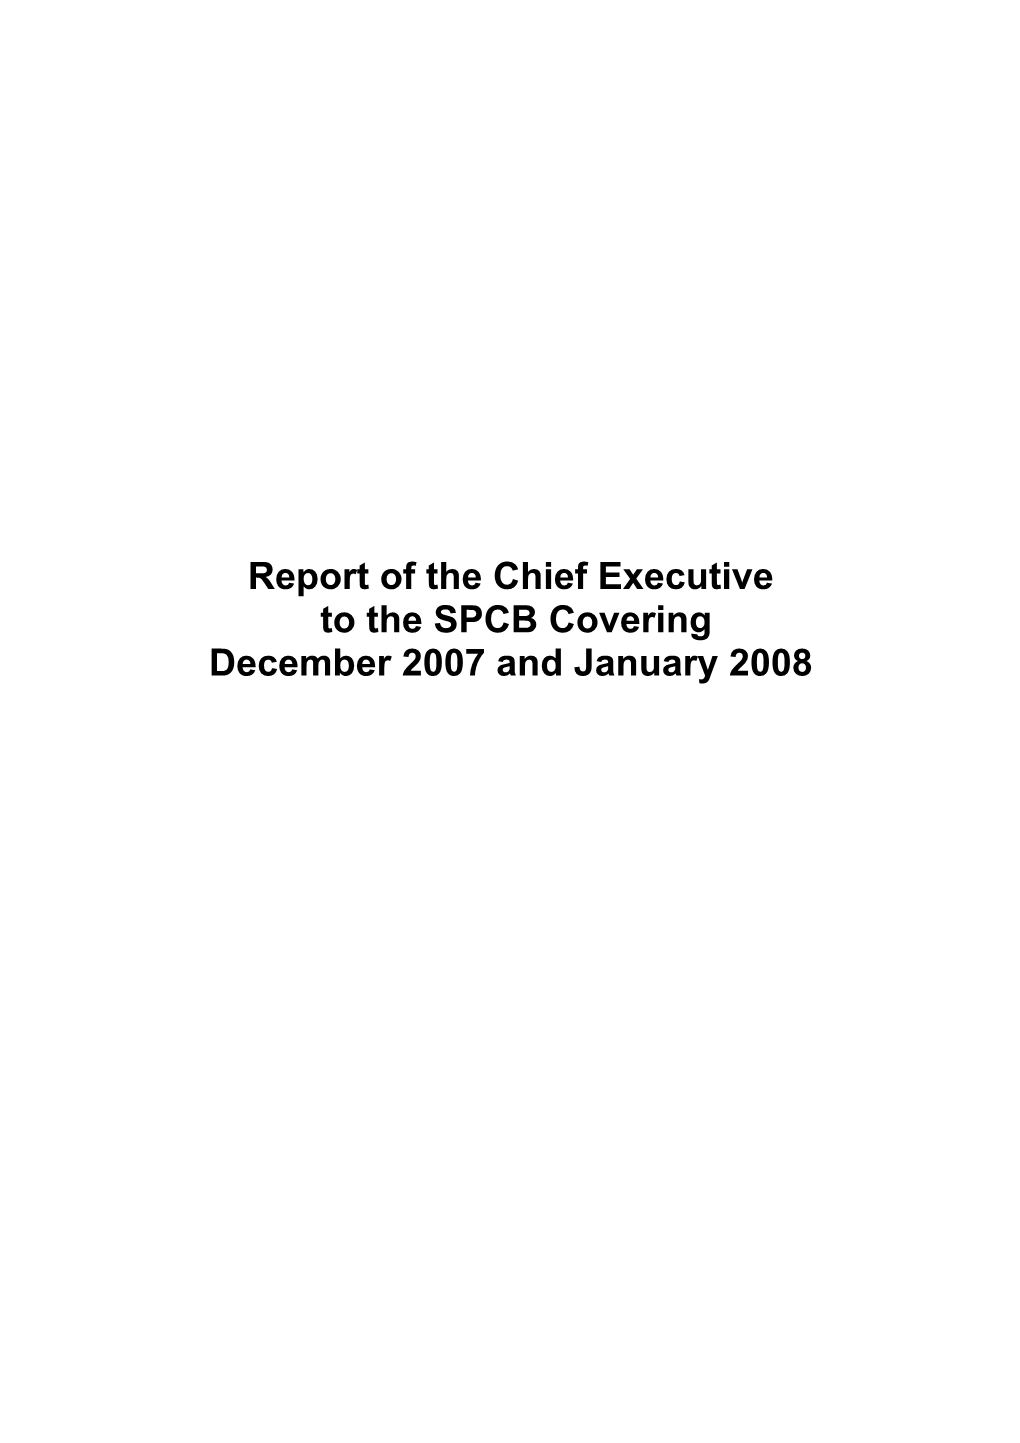 Report of the Chief Executive to the SPCB Covering December 2007 and January 2008